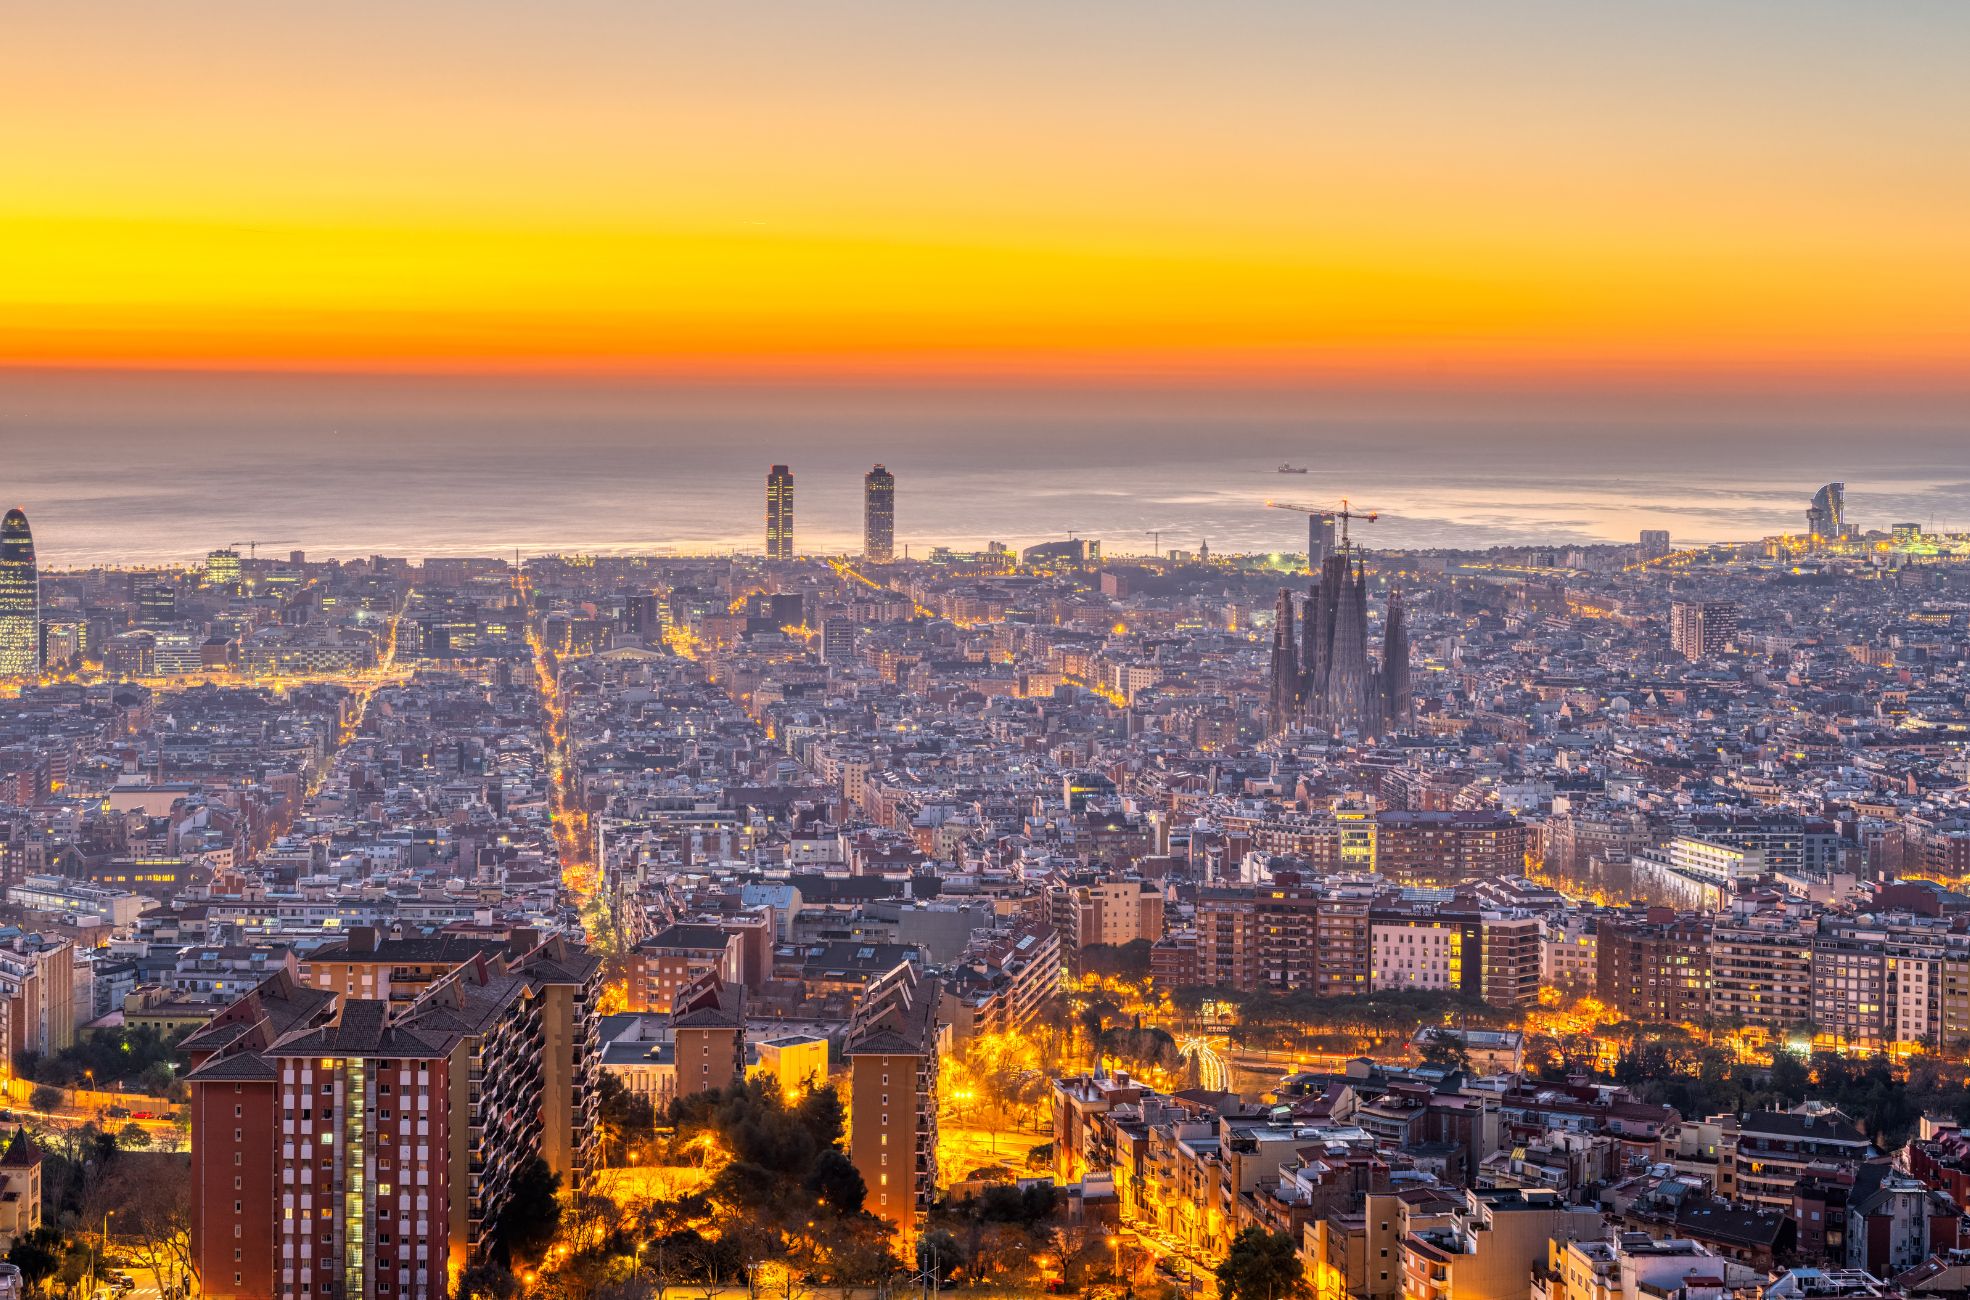 Barcelona In Spain At Night With Golden Visa